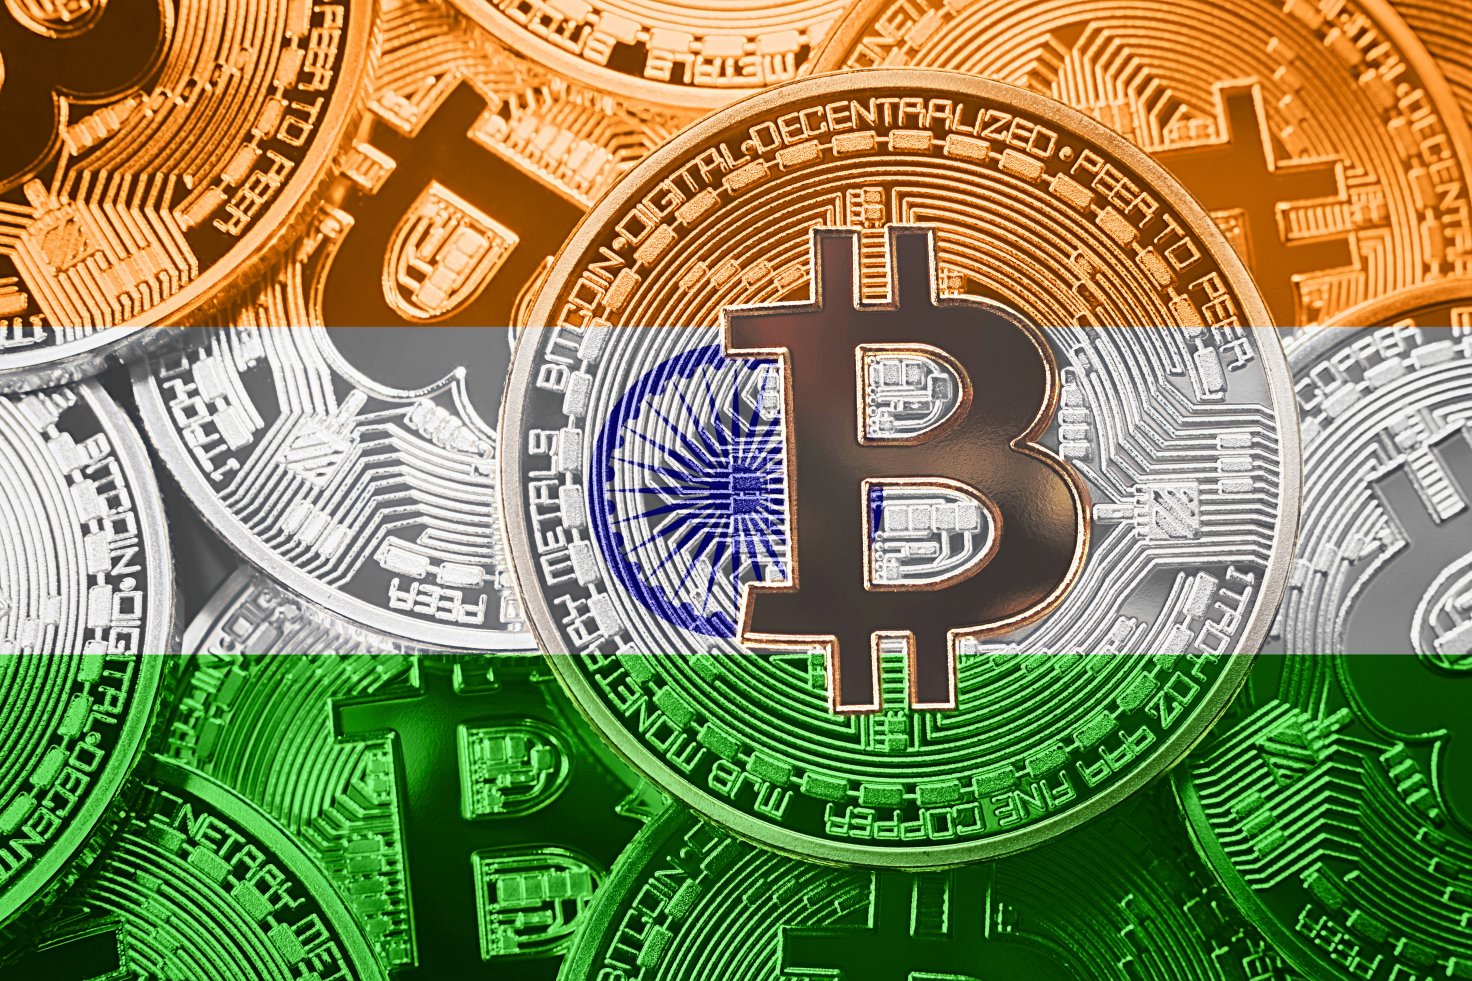 (Case Study) India Crypto Ban: What’s The Situation? | Currency.com